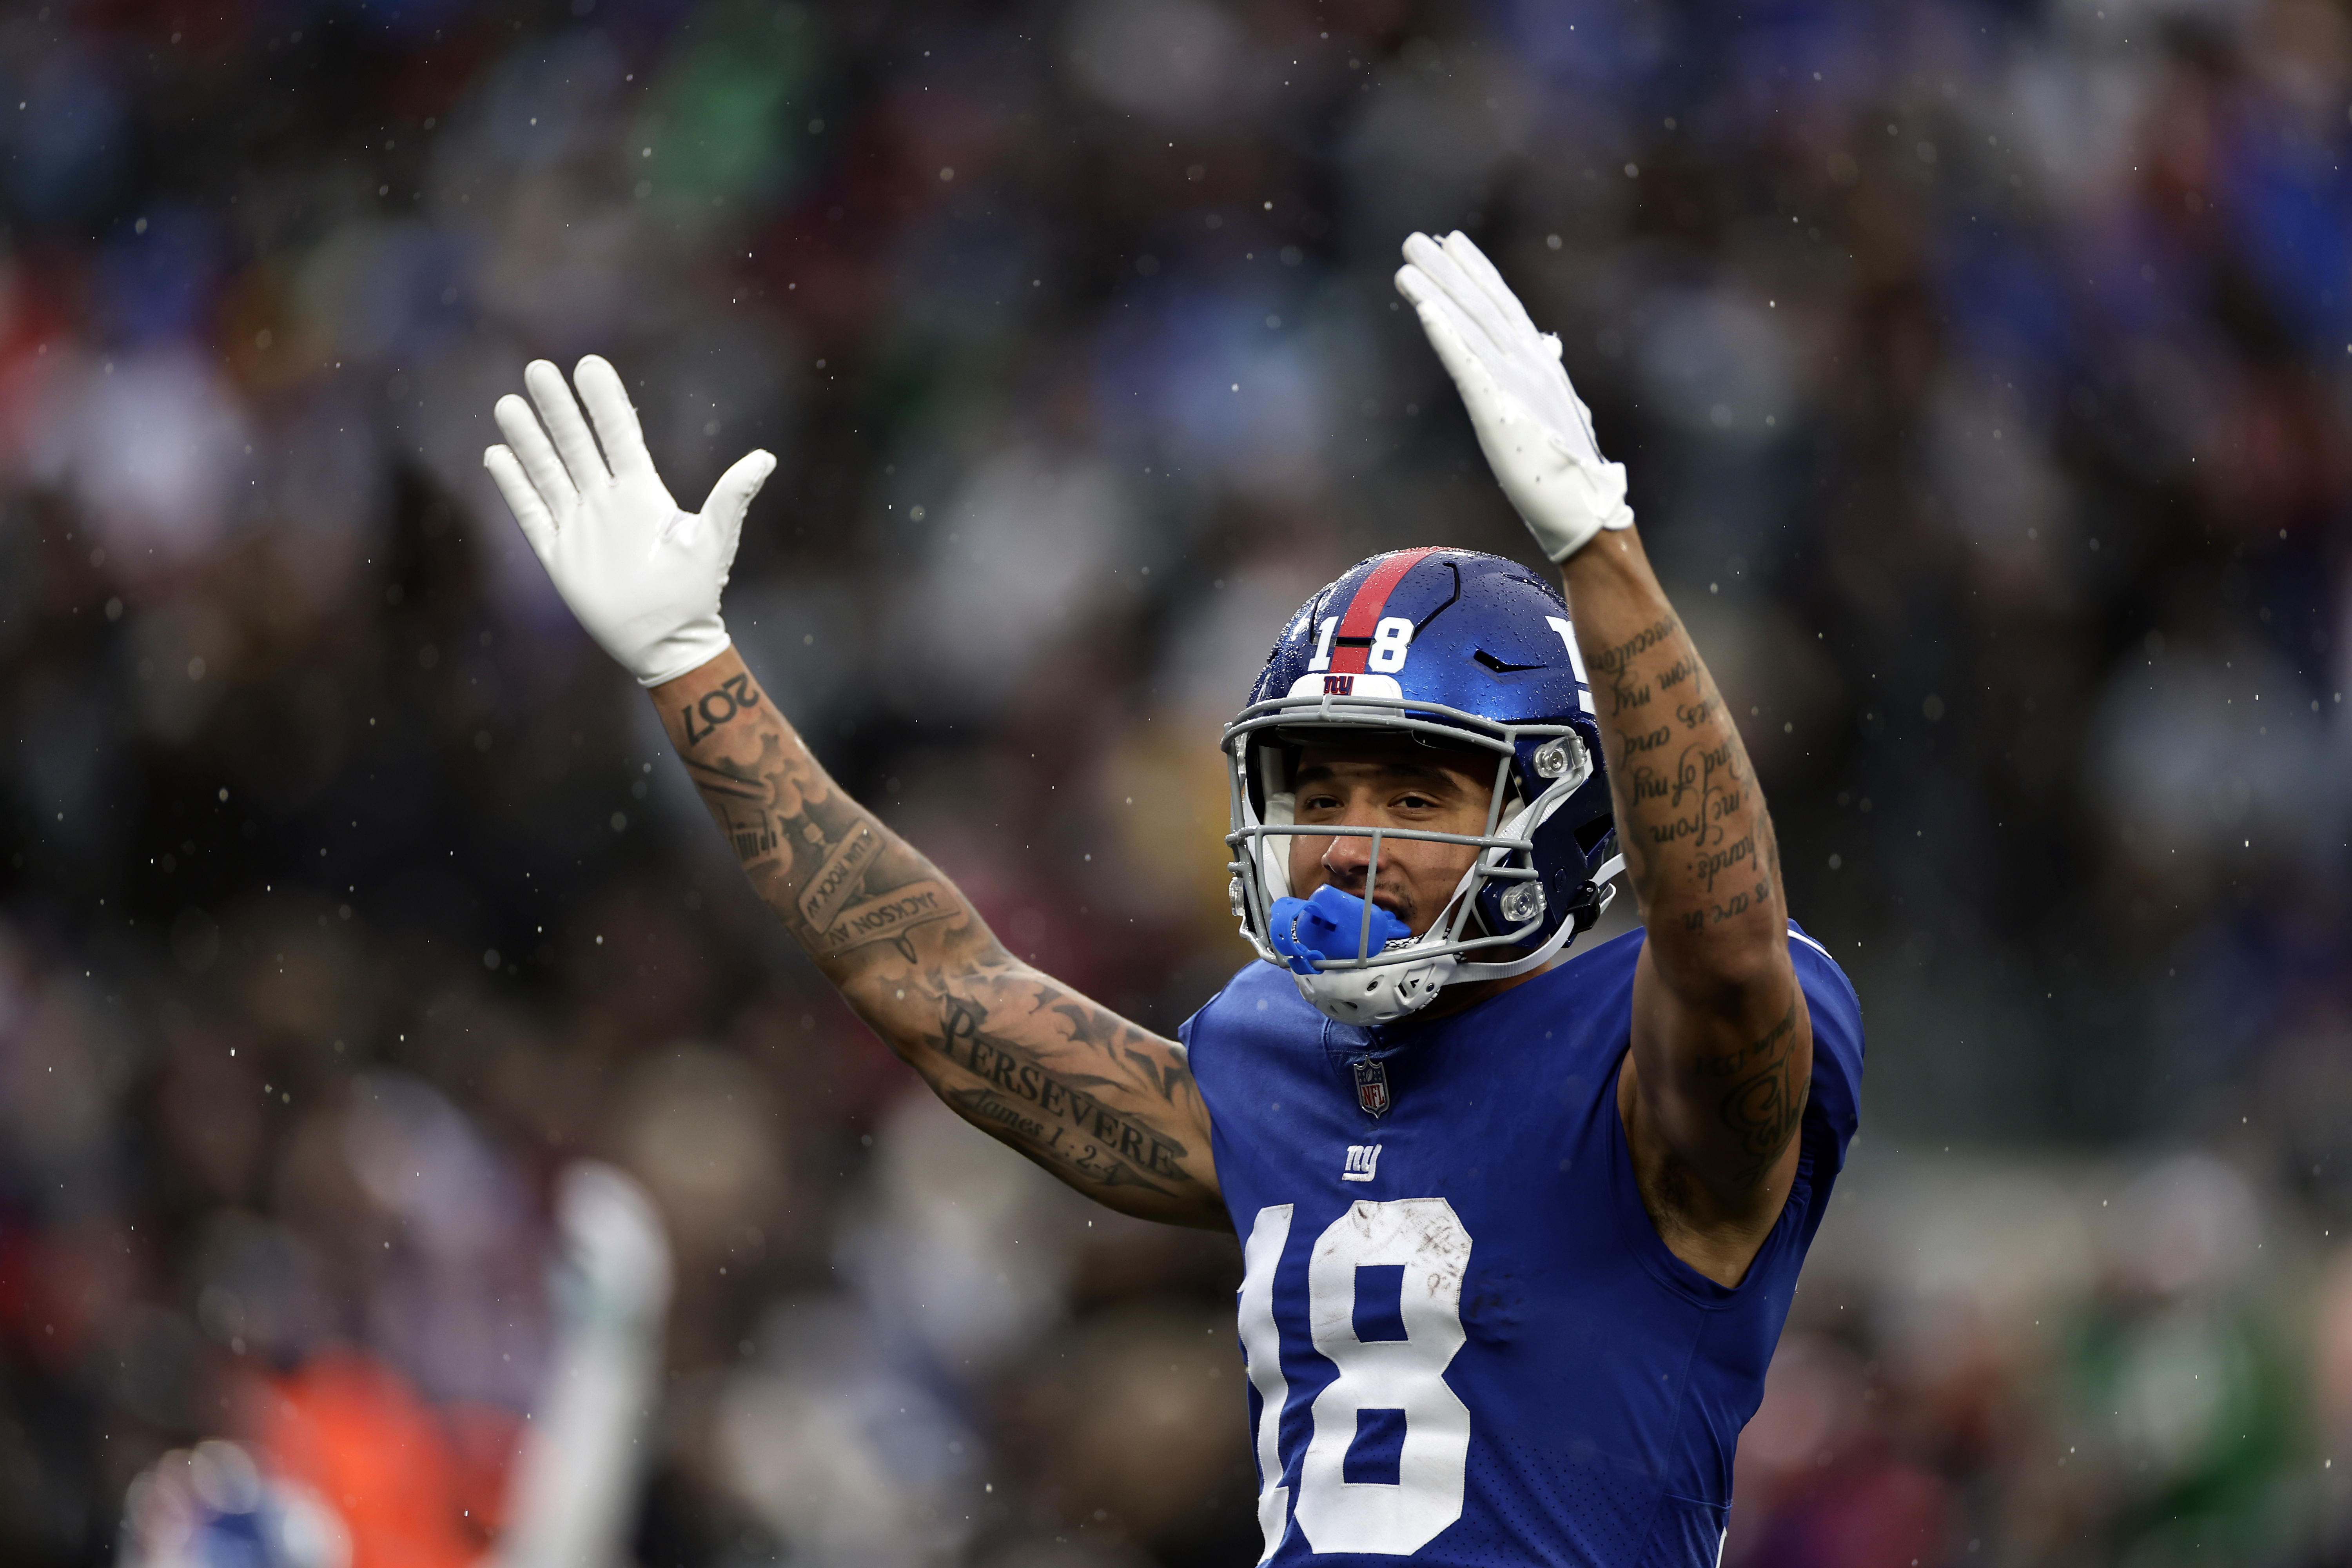 How to watch Giants vs. Eagles Week 18: Live stream, TV channel